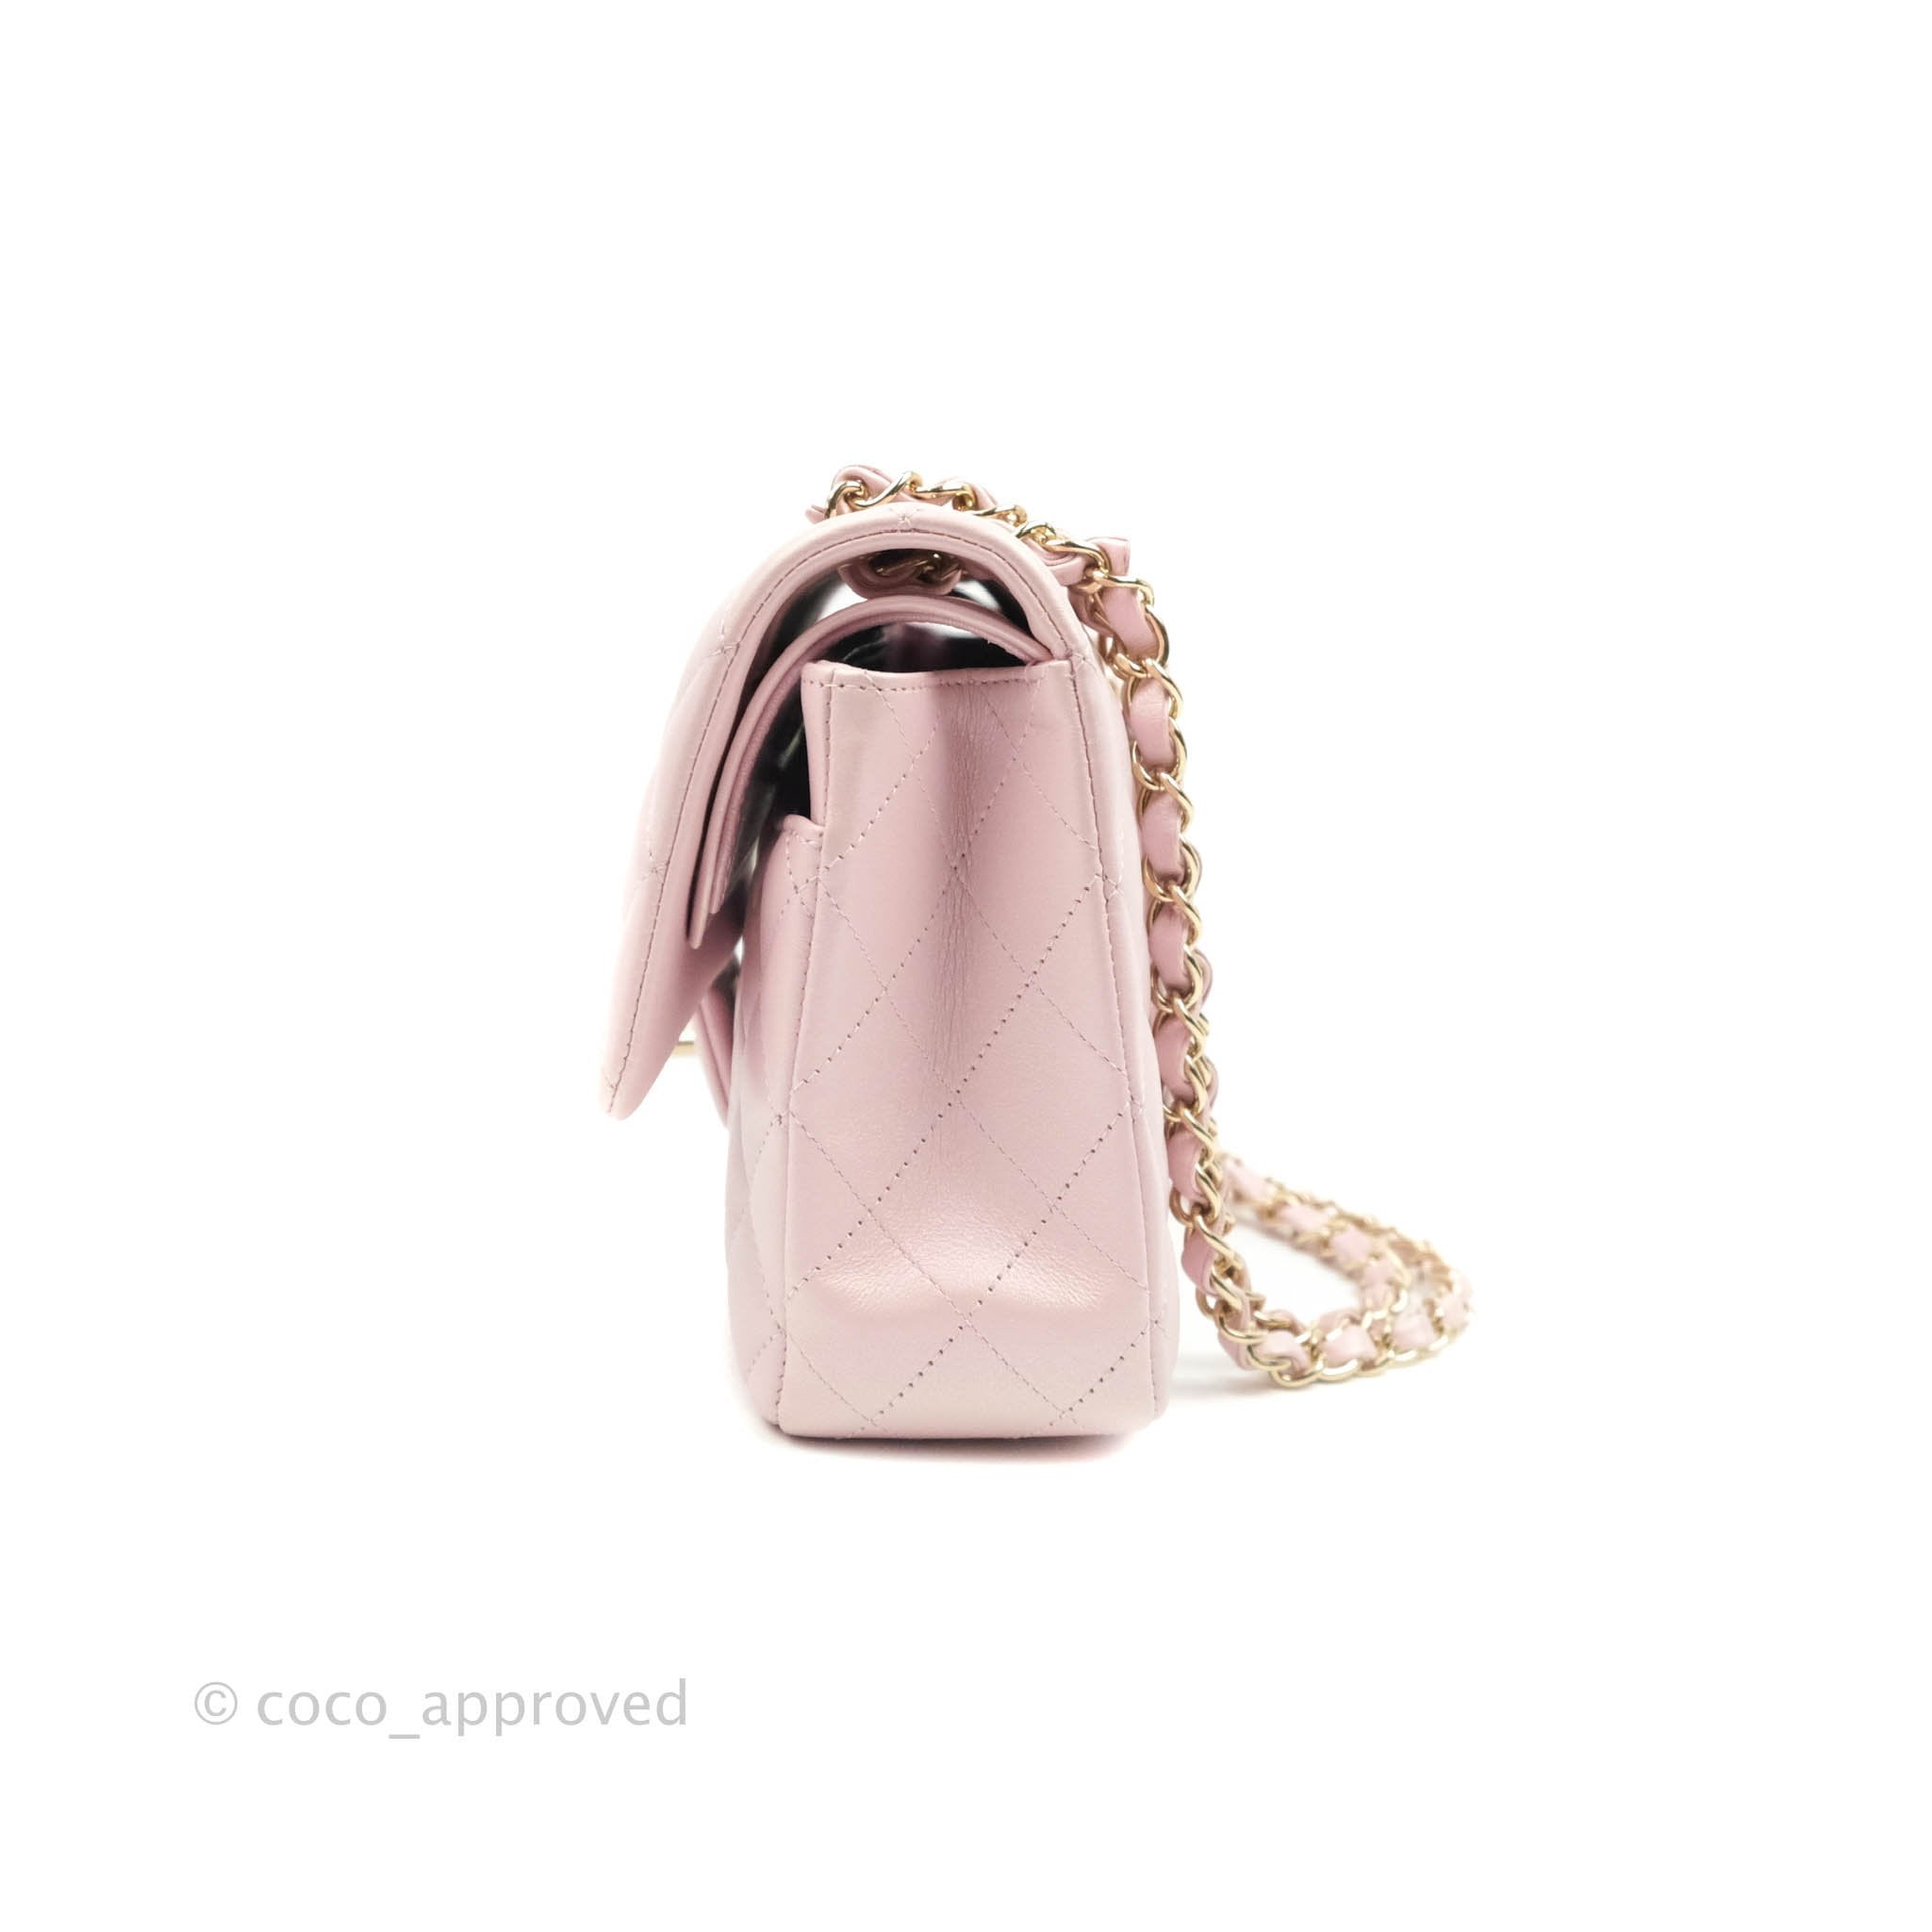 Chanel Vintage Classic Single Flap Bag Quilted Iridescent Calfskin